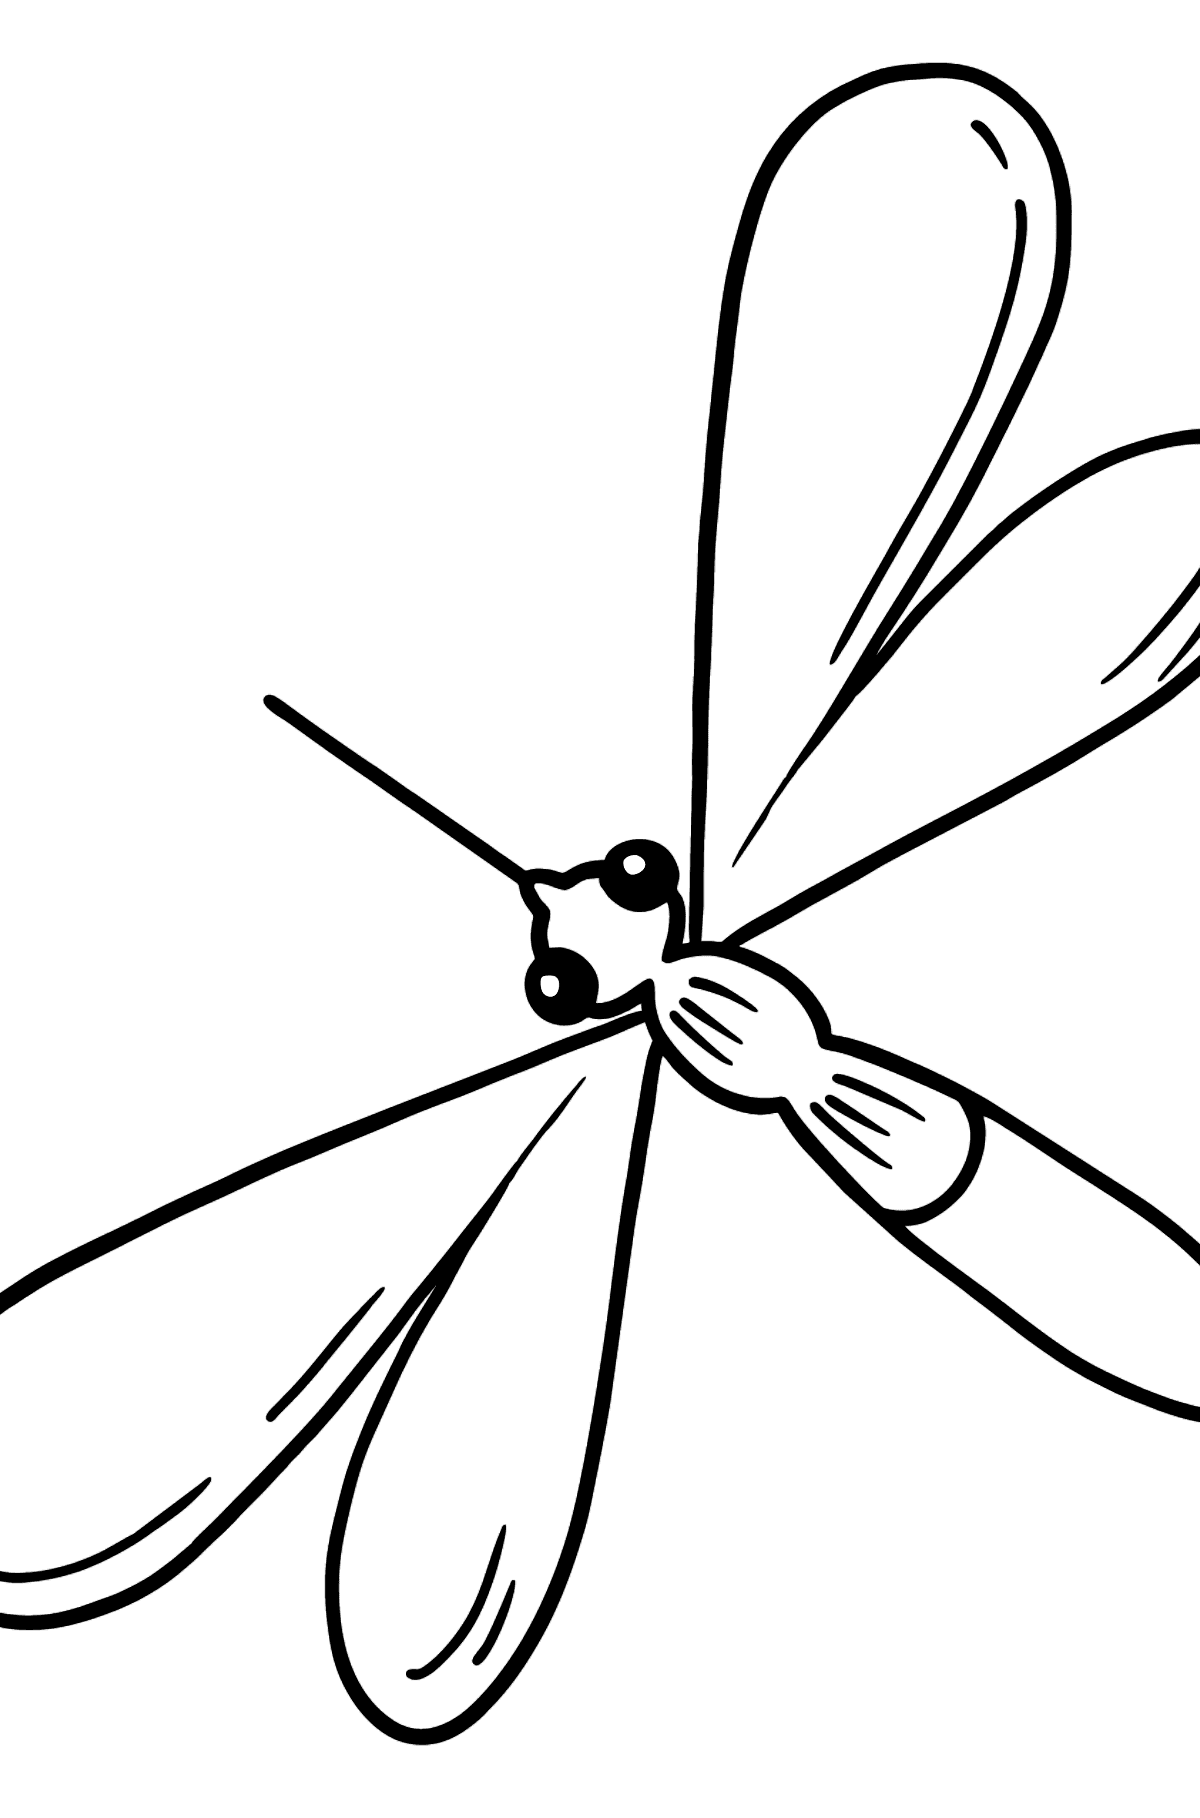 Mosquito coloring page - Coloring Pages for Kids